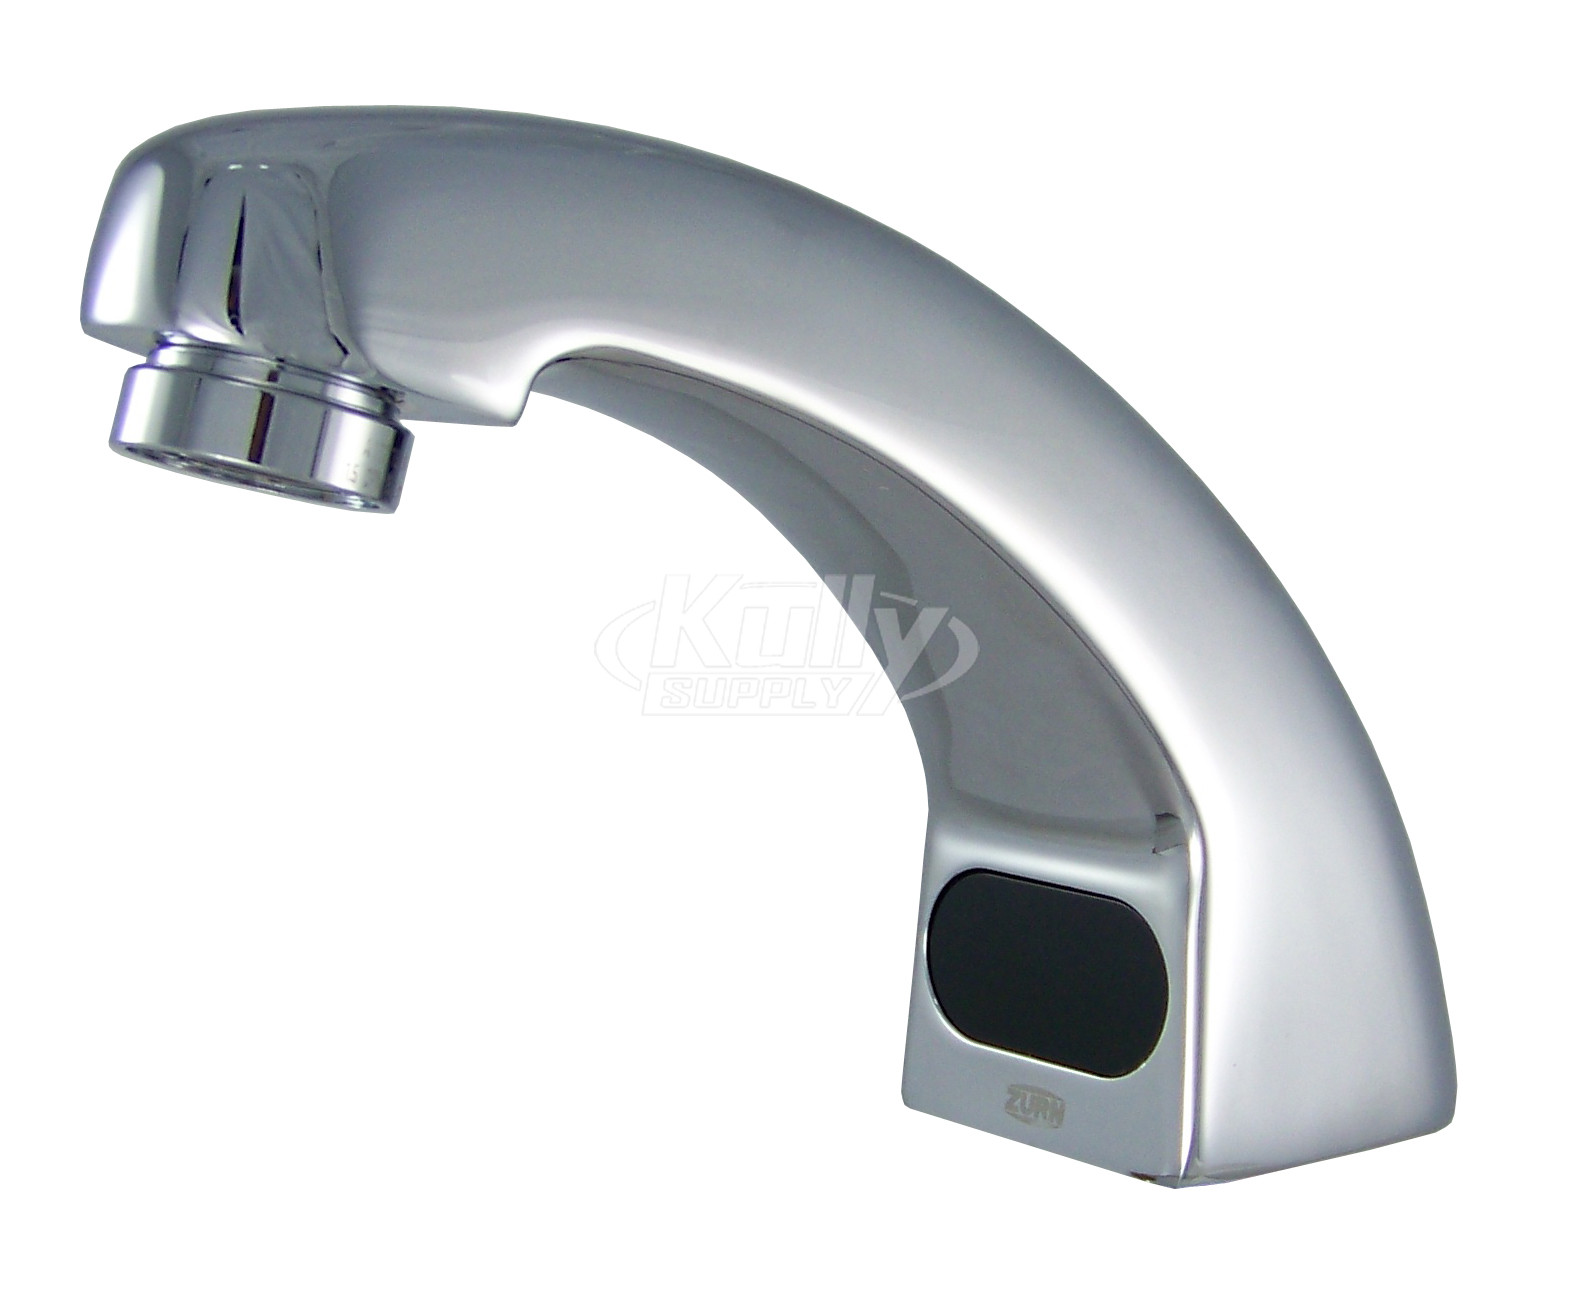 Zurn P6914-1 Spout Assembly (with Spout, Aerator & Sensor) (Discontinued)